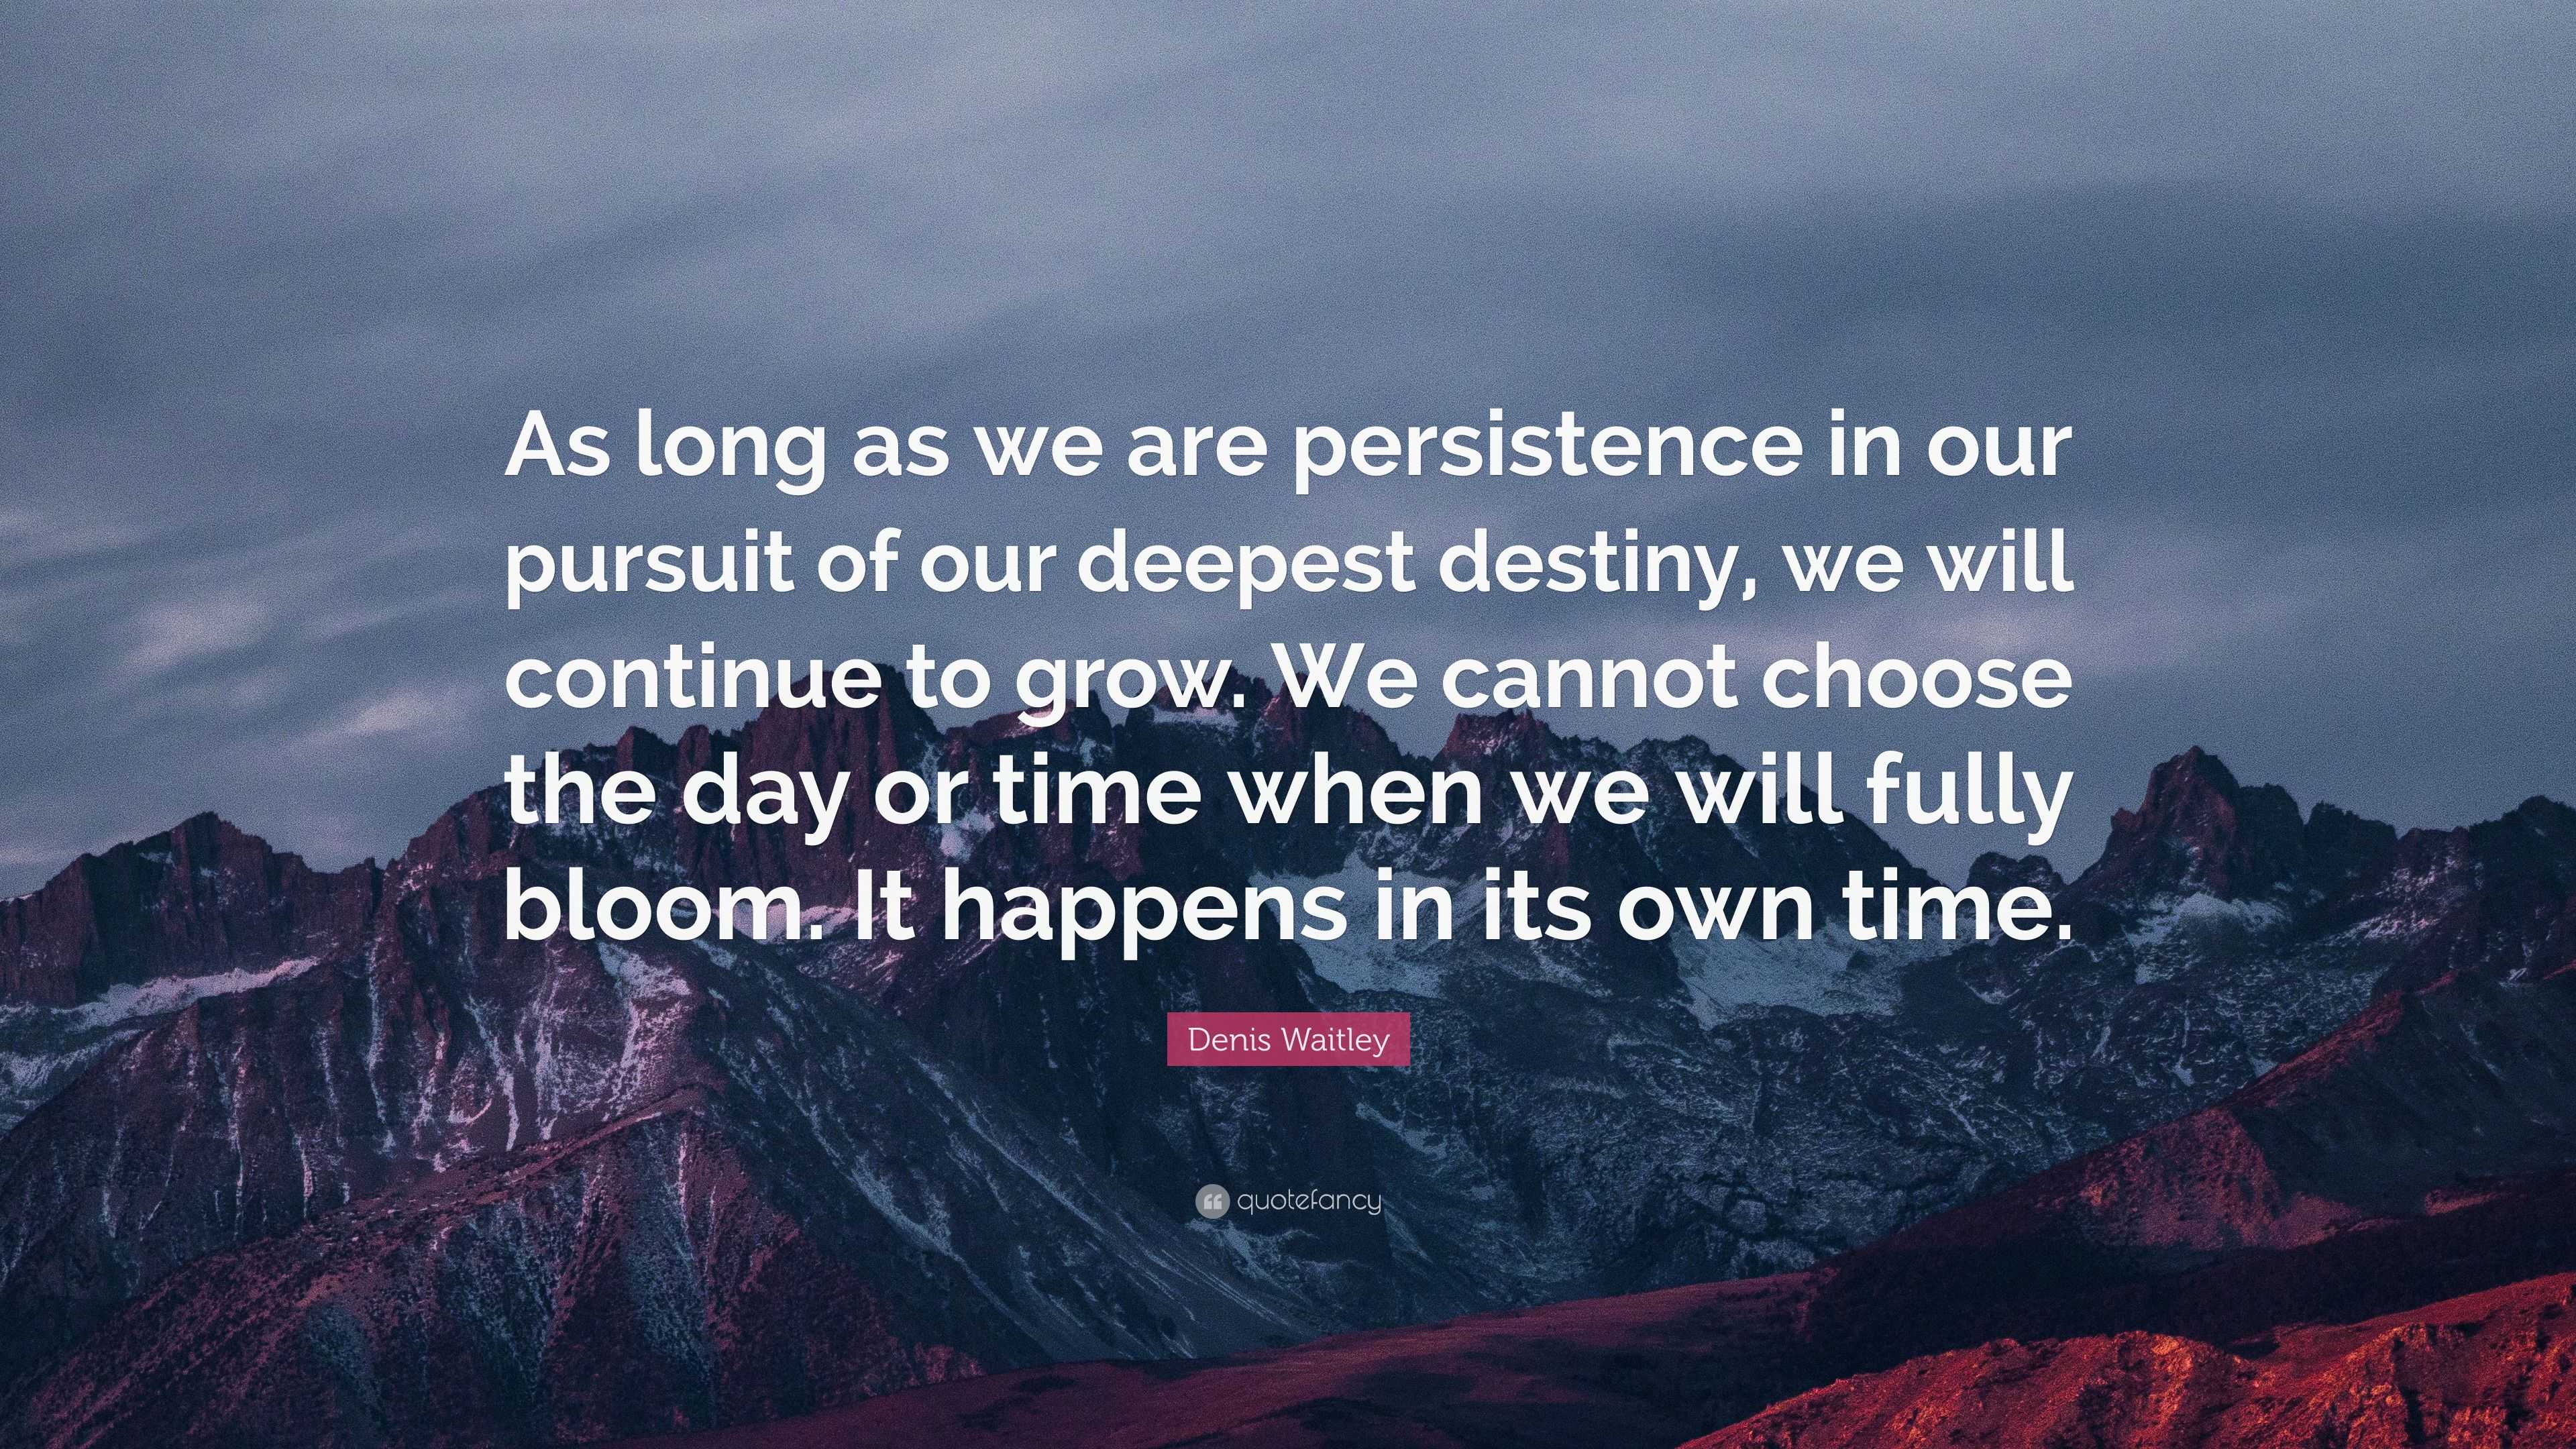 Denis Waitley Quote: “As long as we are persistence in our pursuit of ...